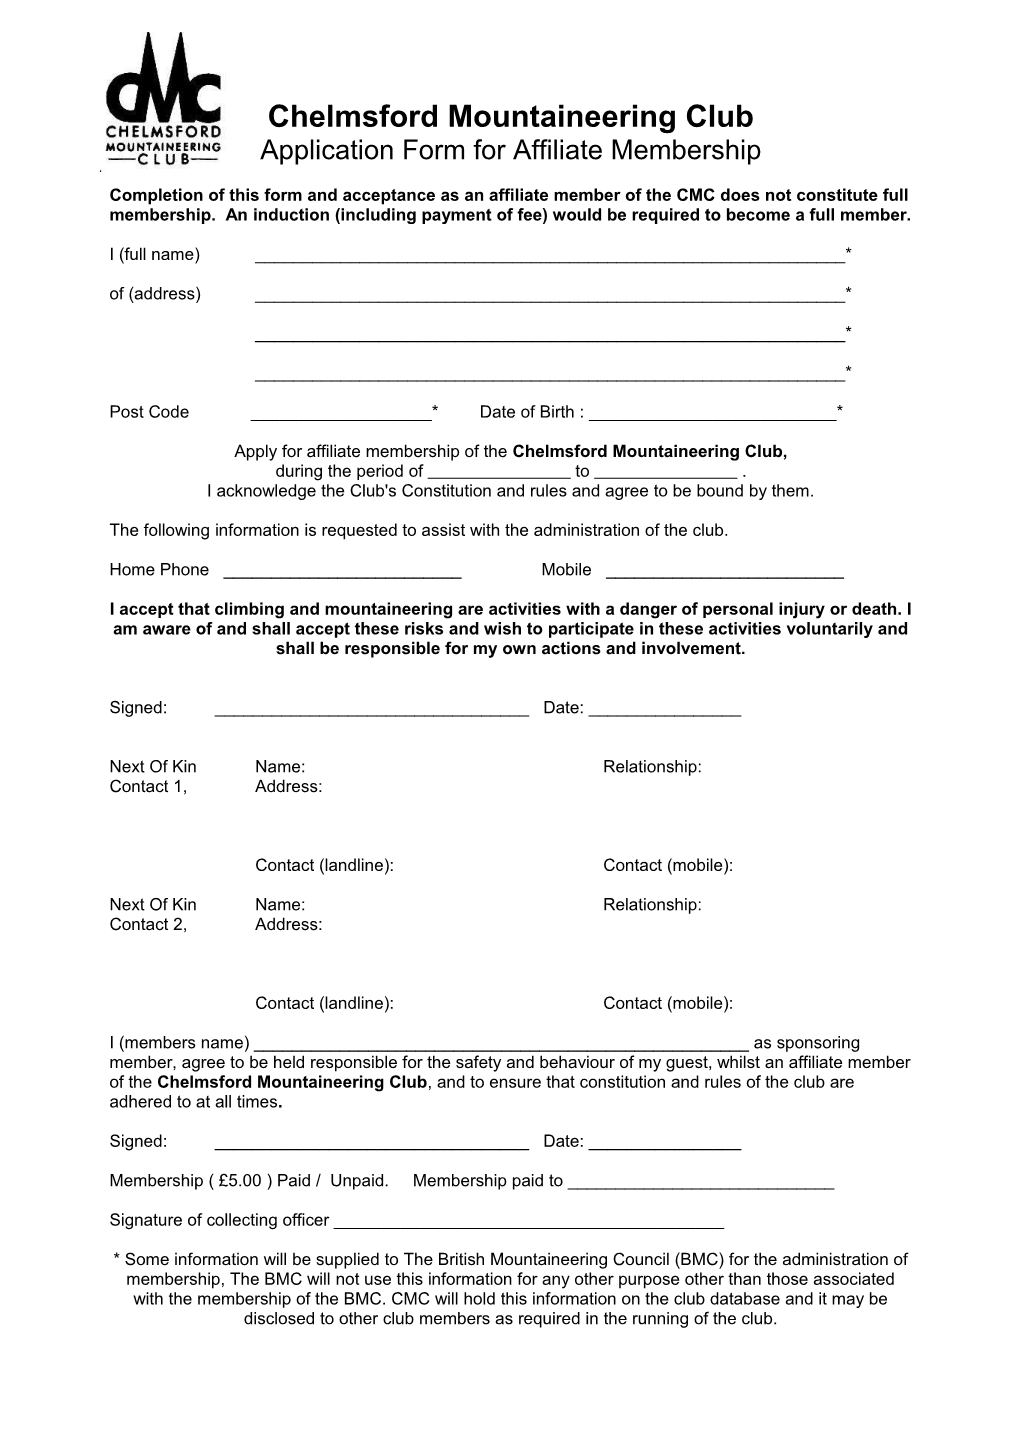 Application Form for Affiliate Membership